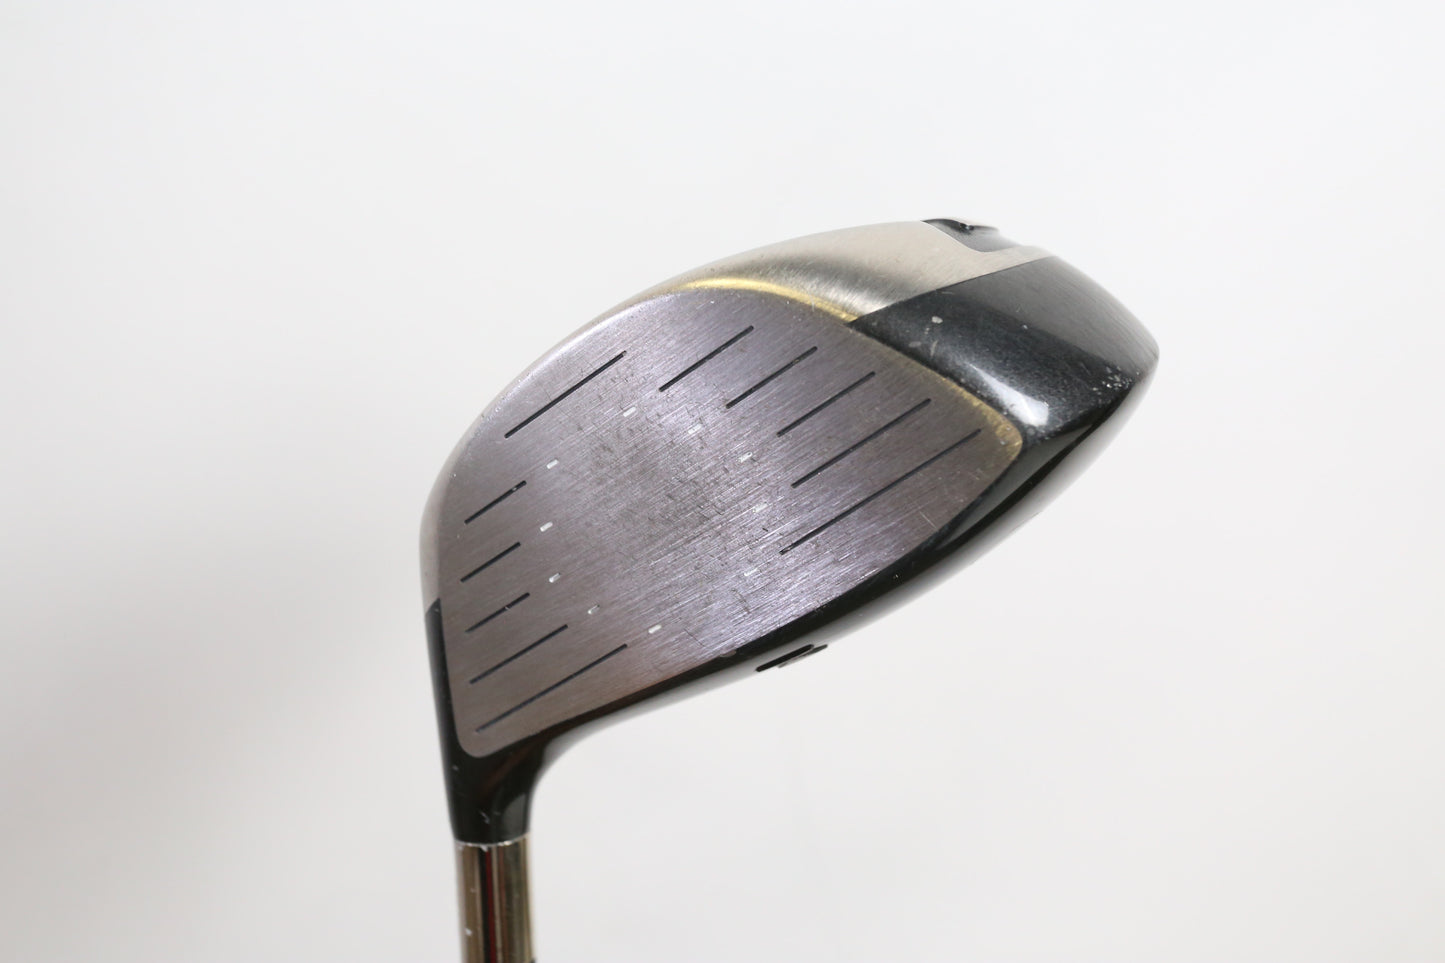 Used Titleist 905T Driver - Right-Handed - 8.5 Degrees - Stiff Flex